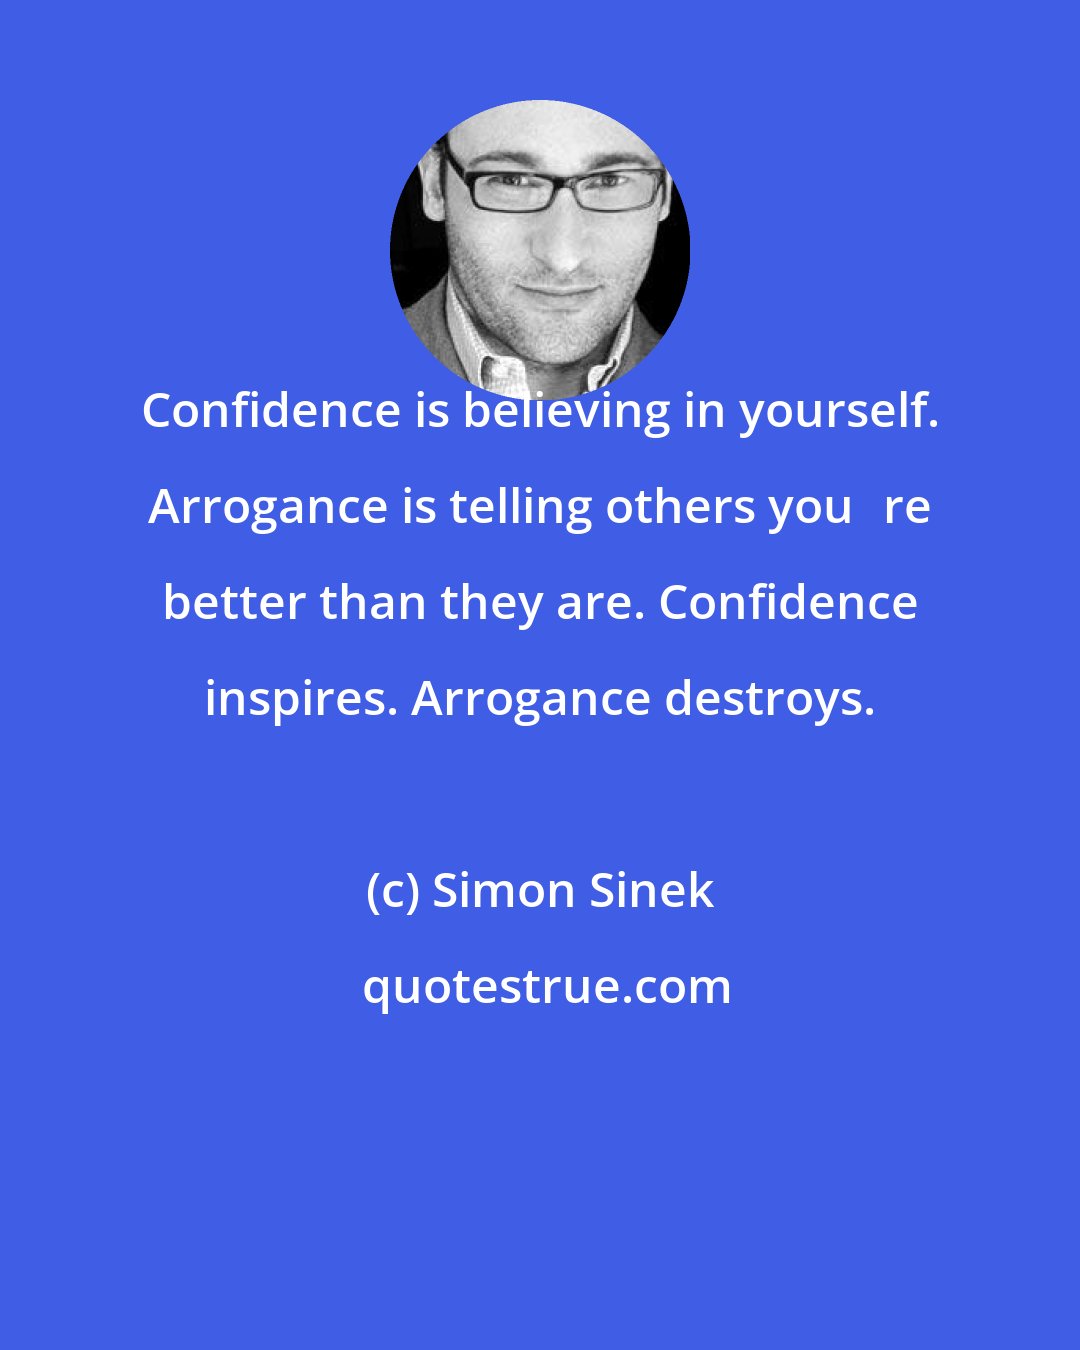 Simon Sinek: Confidence is believing in yourself. Arrogance is telling others youre better than they are. Confidence inspires. Arrogance destroys.